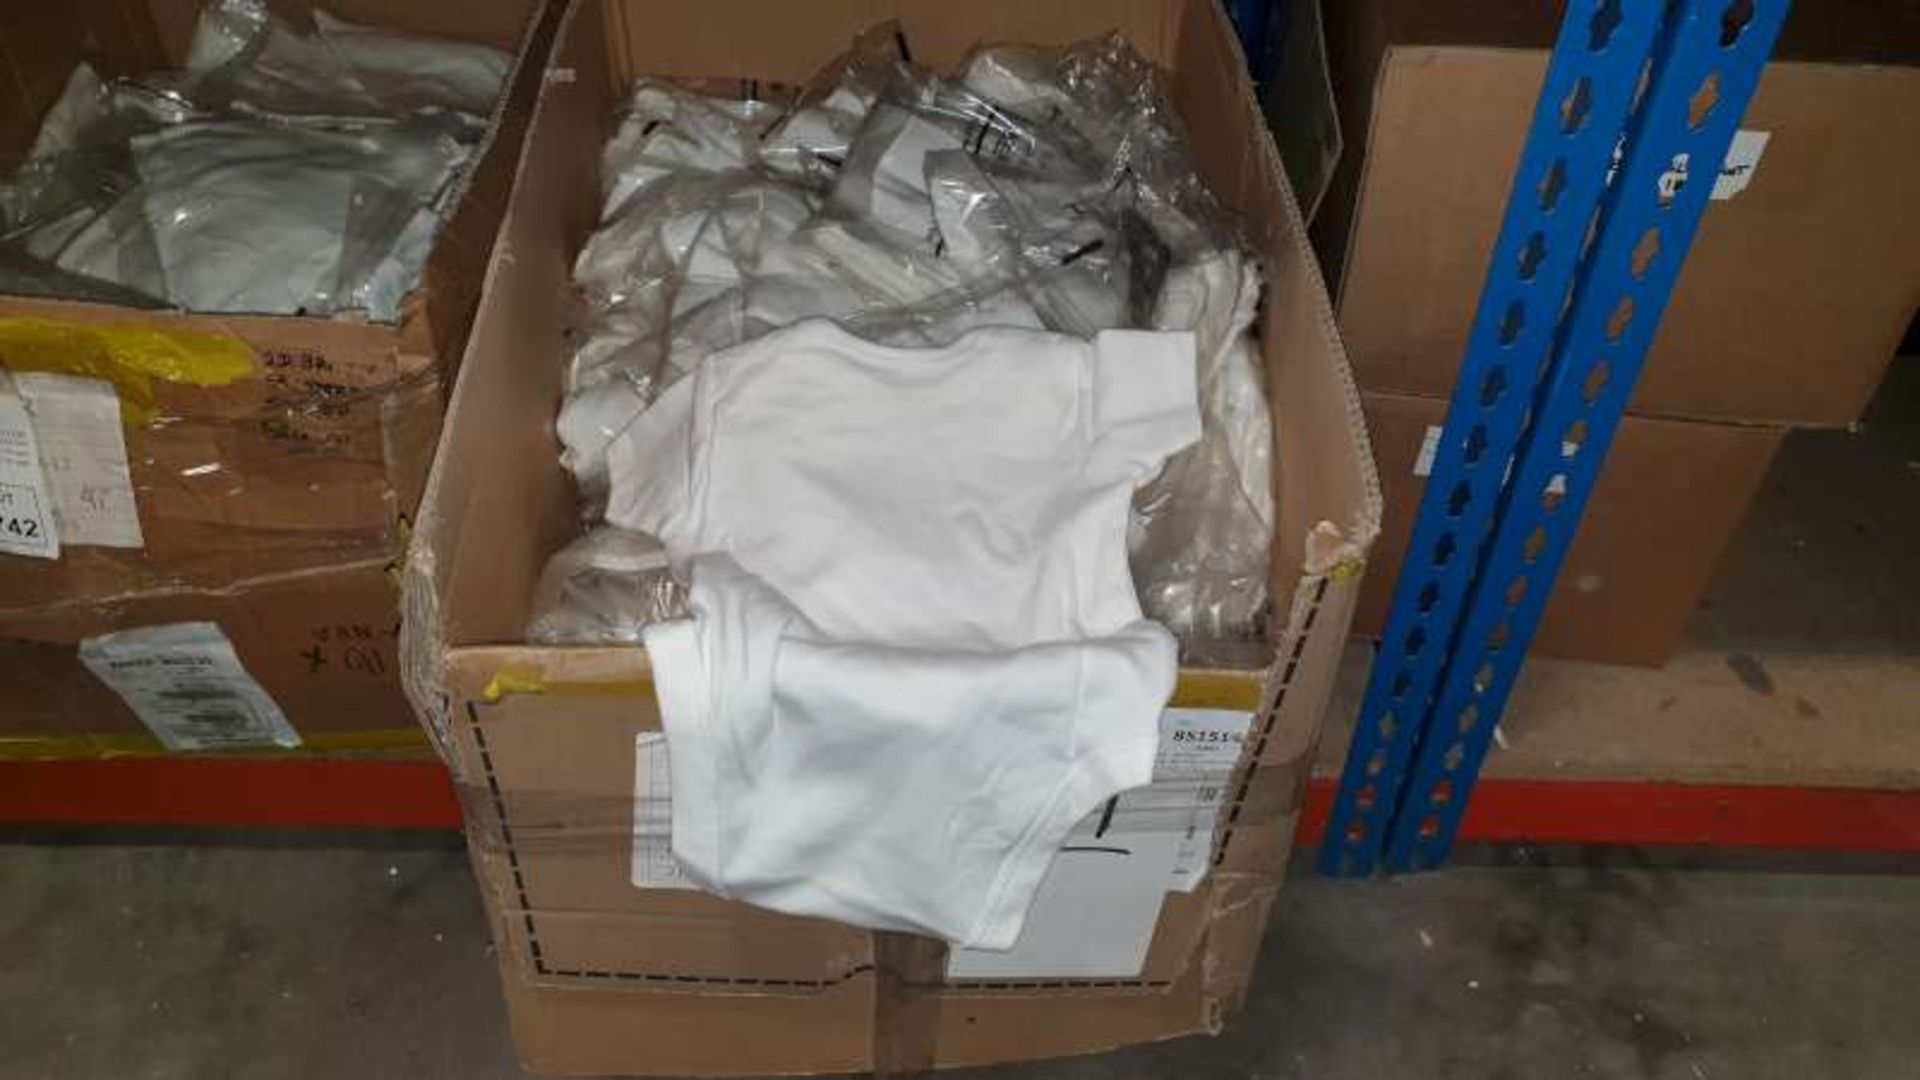 APPROX 100 X BABY VESTS IN VARIOUS SIZES IN 1 BOX